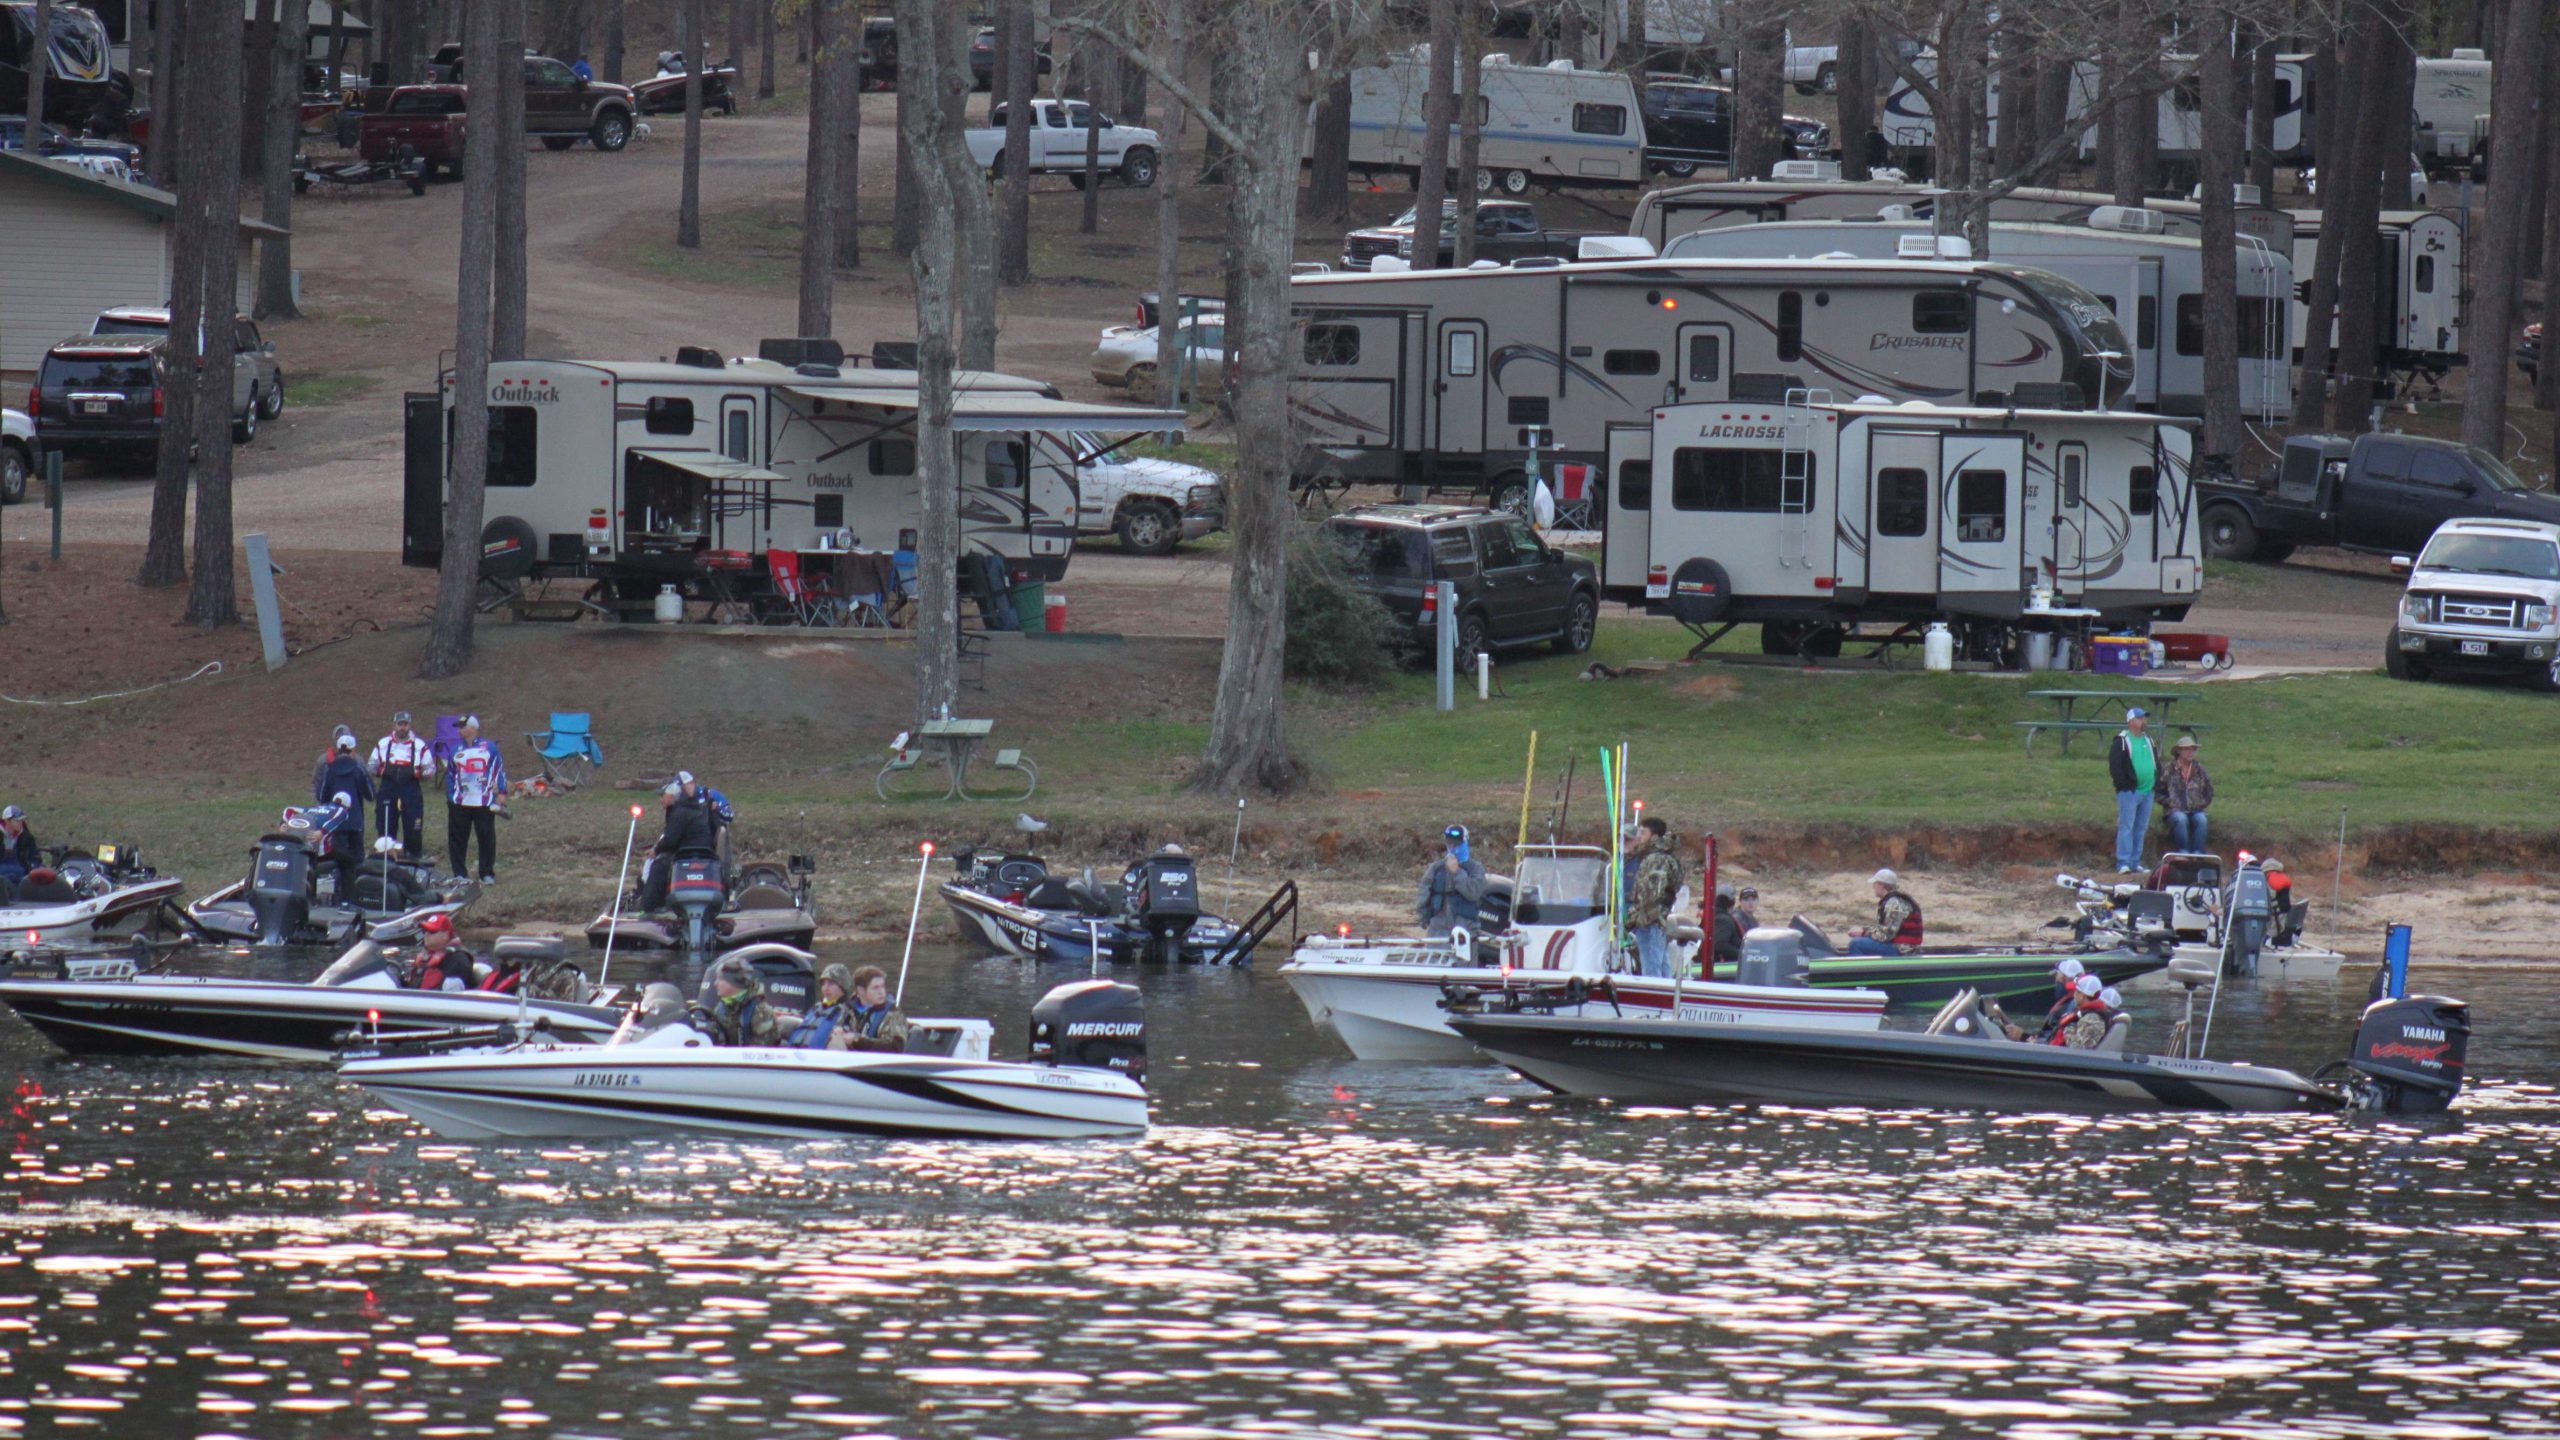 With half the field already gone, the Cypress Bend Marina still was filled with boats at daybreak. Check out the campers in the background. A lot of the teams are staying nearby.